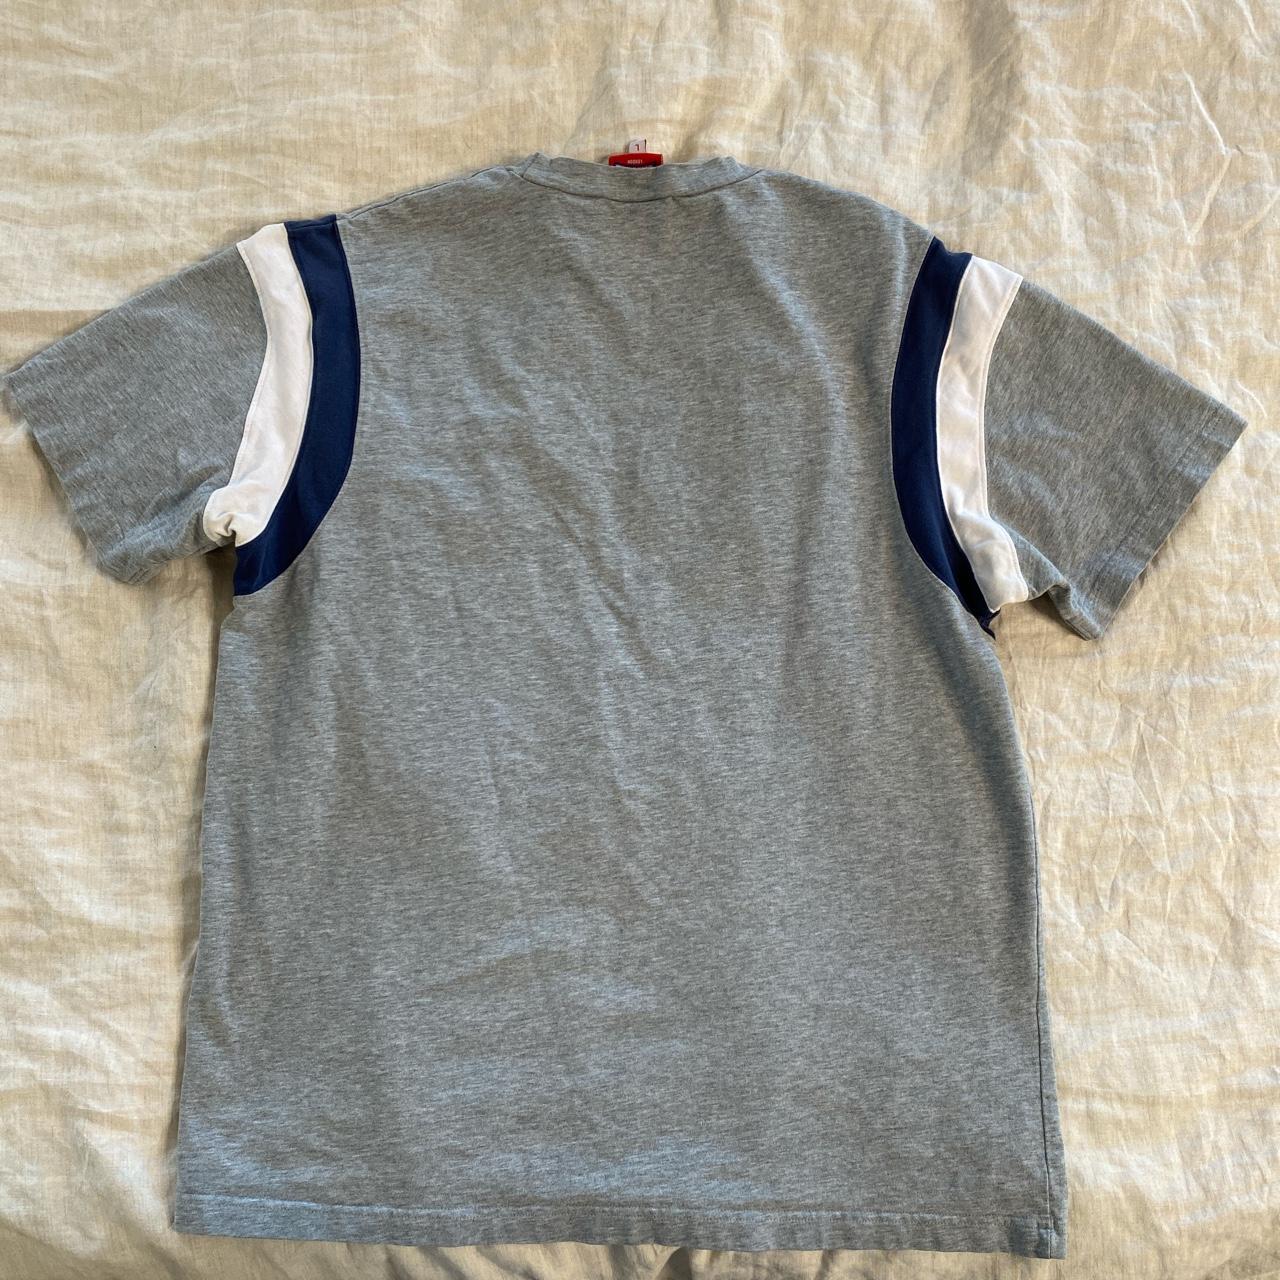 Lonsdale Men's Grey and Navy T-shirt (3)